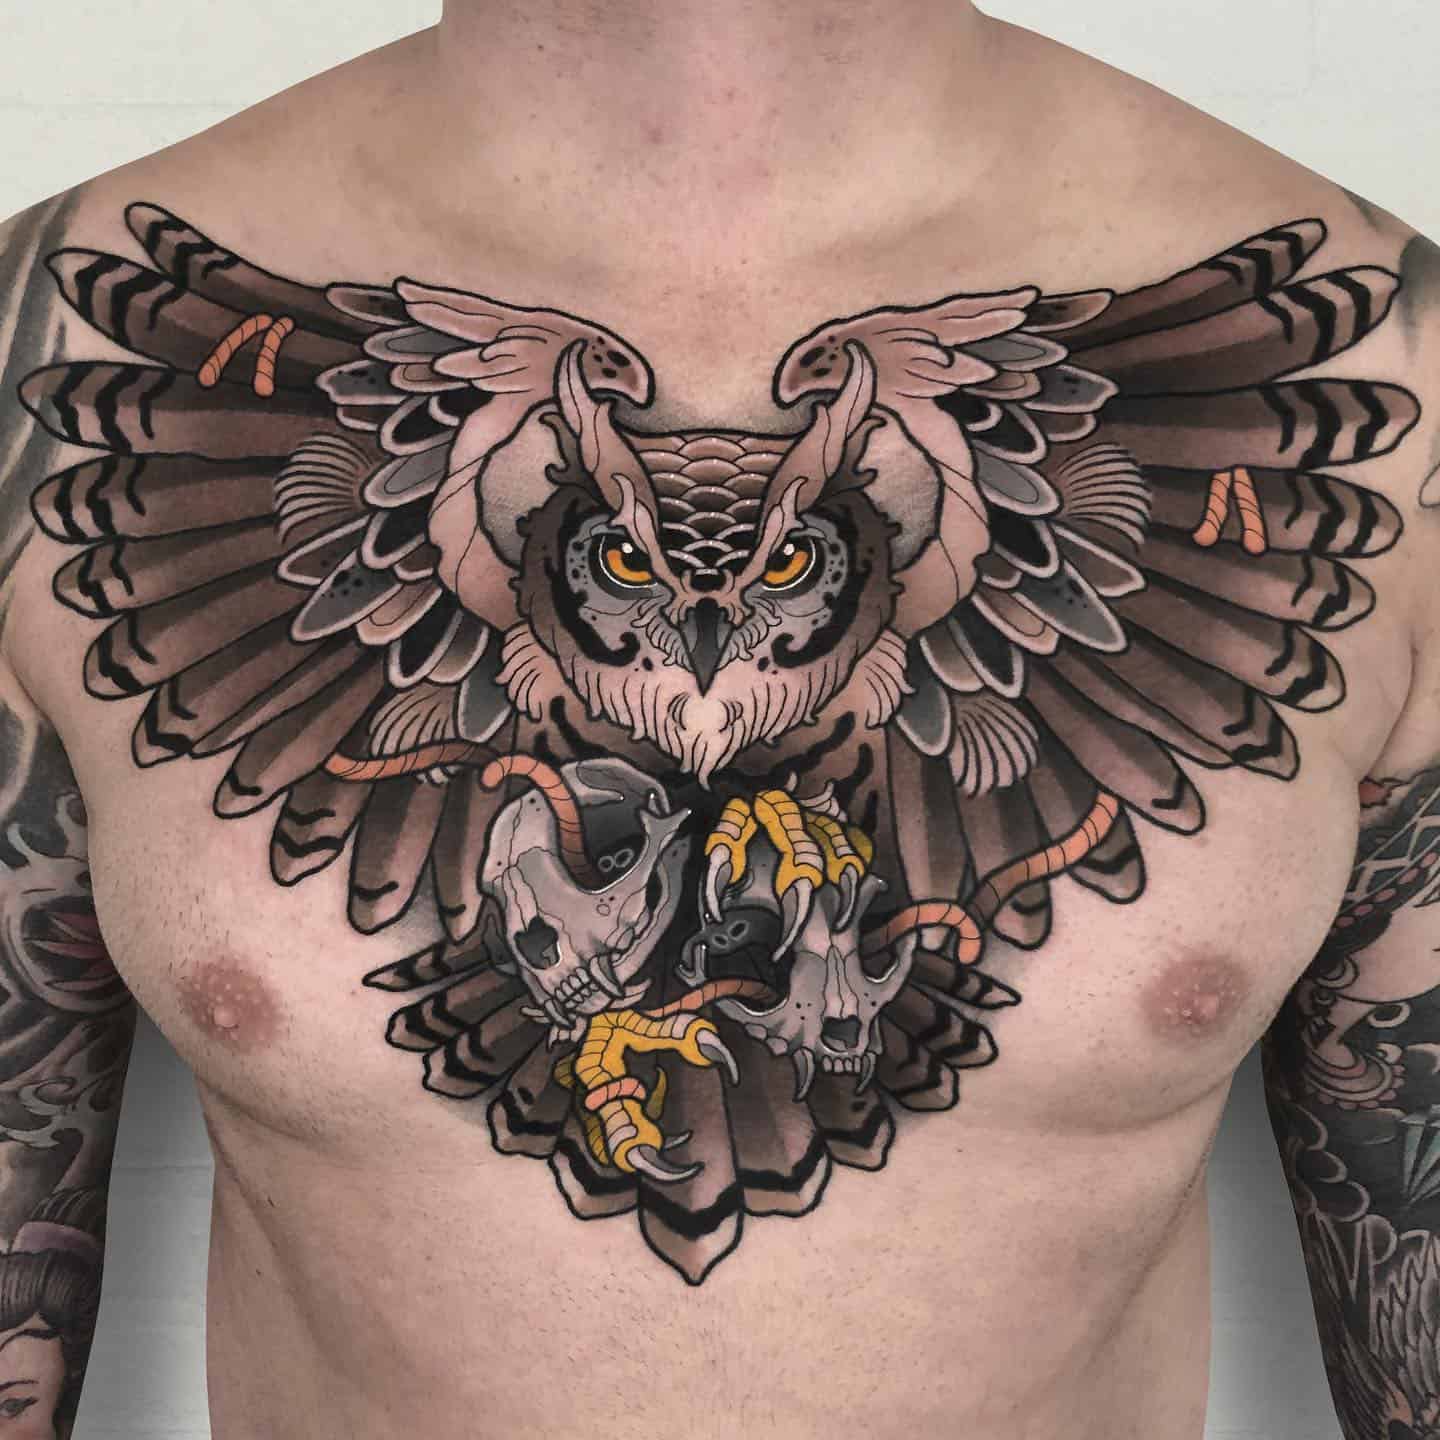 Owl tattoo by jj.neotraditional